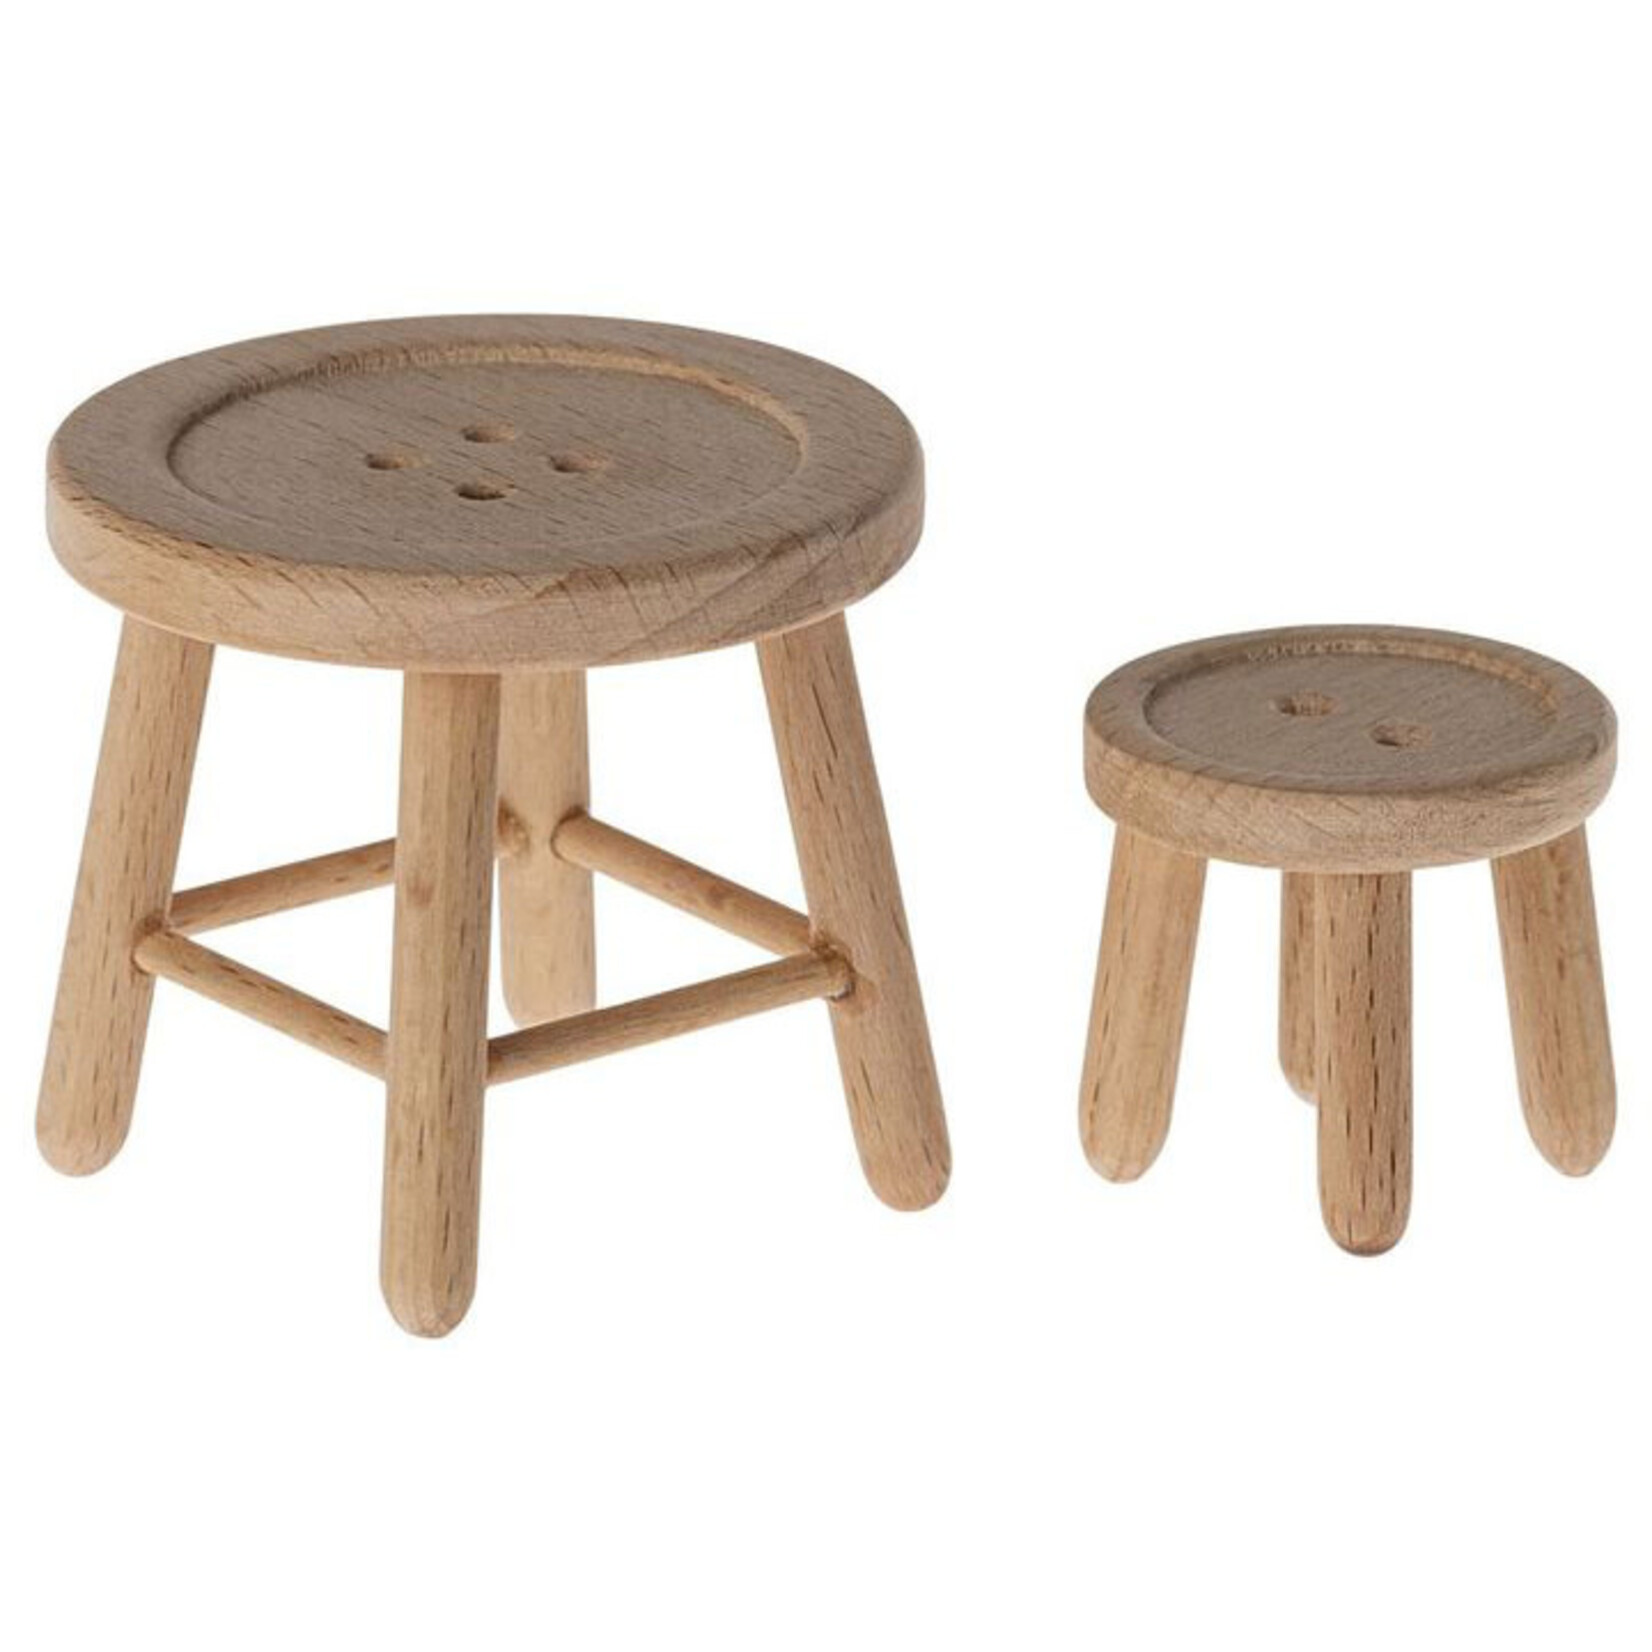 Maileg PRE ORDER Maileg Table and stool set for Mouse - Estimated arrival beginning June